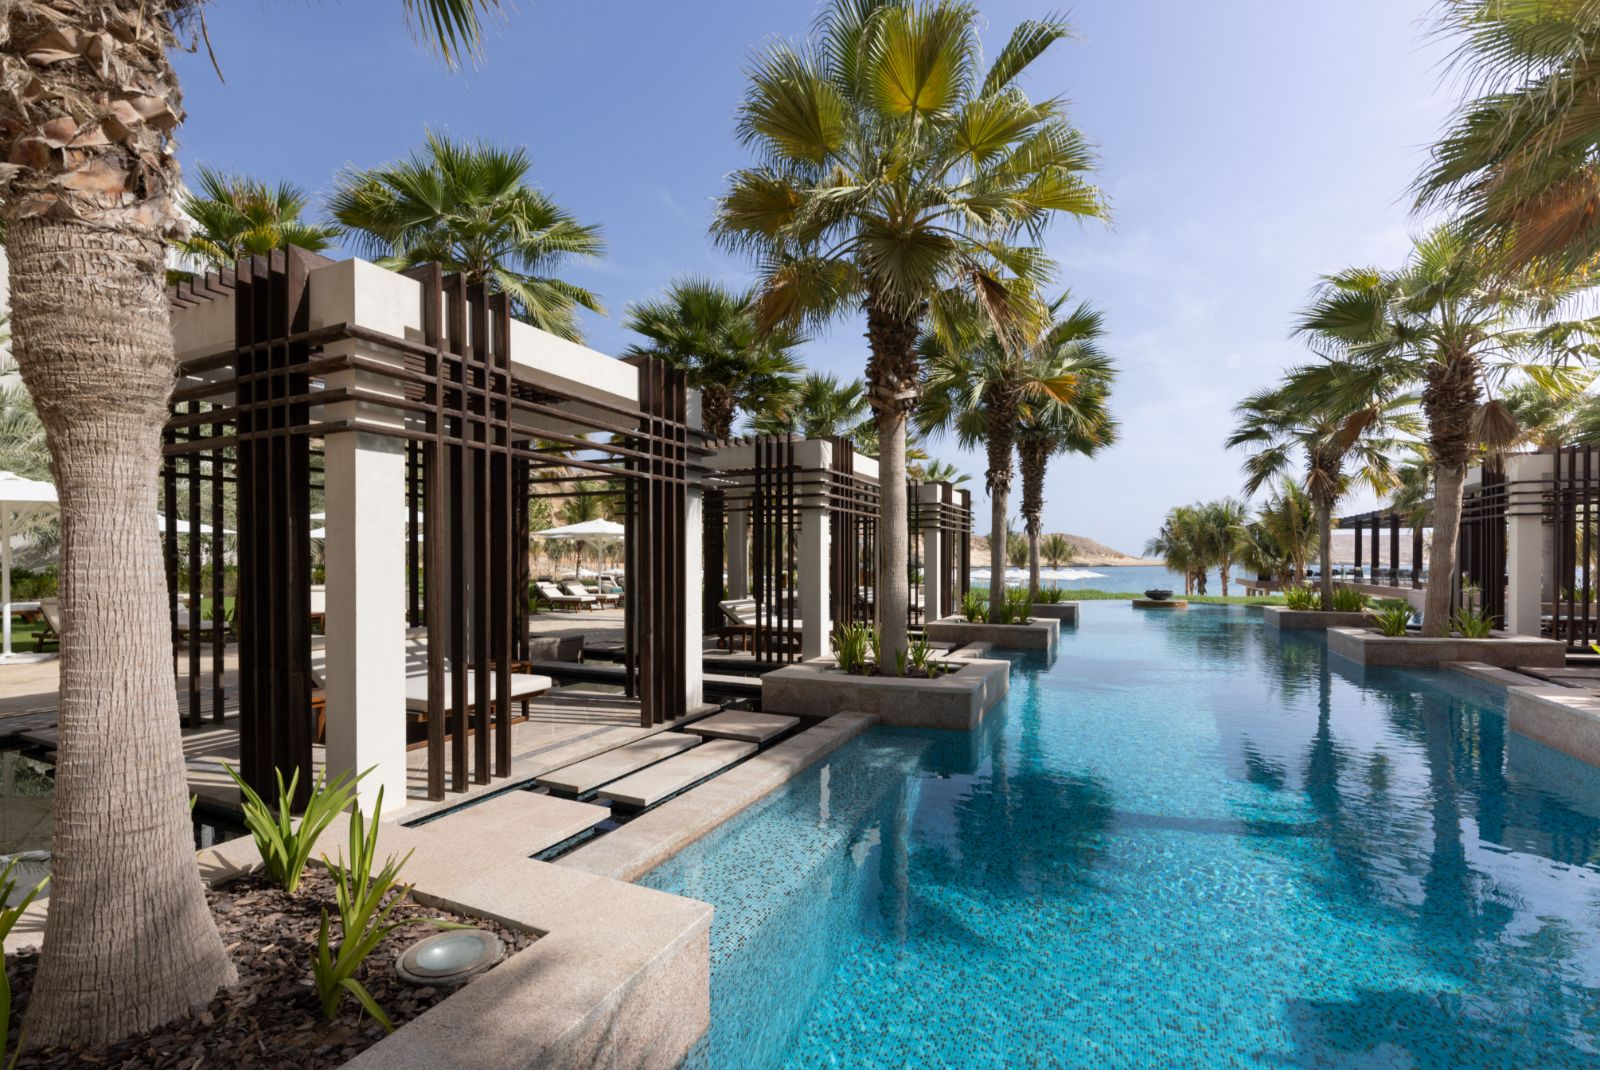 Huts by the poolside at Jumeirah Muscat Bay in Oman